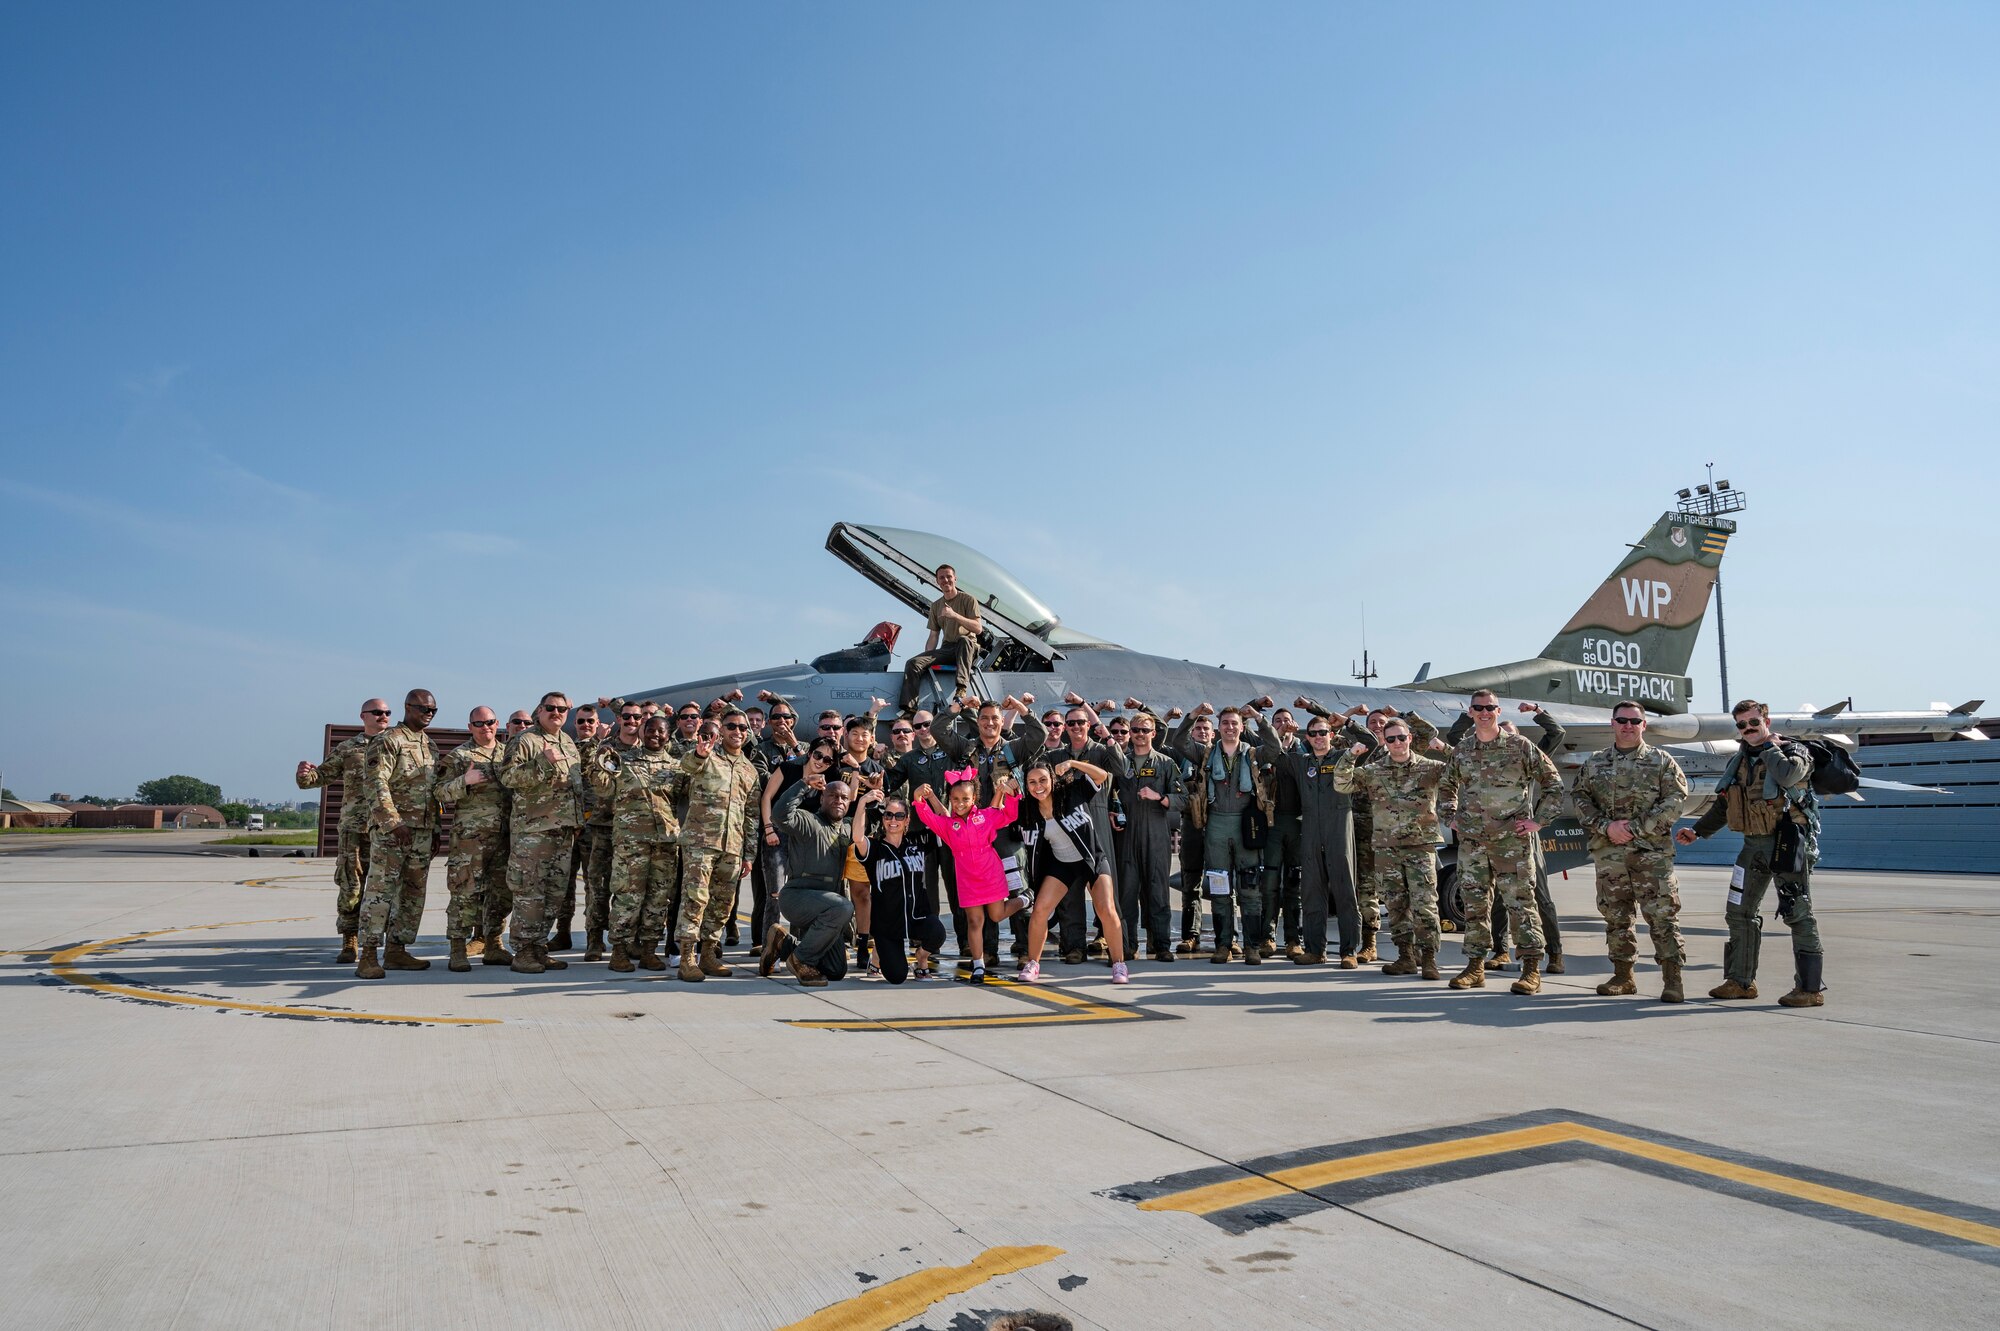 Col. Henry R. Jeffress III, 8th Fighter Wing commander, gathers for a photo with family and Airmen in front of an F-16 Fighting Falcon upon completion of his final flight at Osan Air Base, Republic of Korea, May 17, 2023. Prior to taking command of the 8 FW, Jeffress served as the vice commander for the 51 FW, Osan Air Base, Republic of Korea. (U.S. Air Force photo by Capt. Kaylin P. Hankerson)